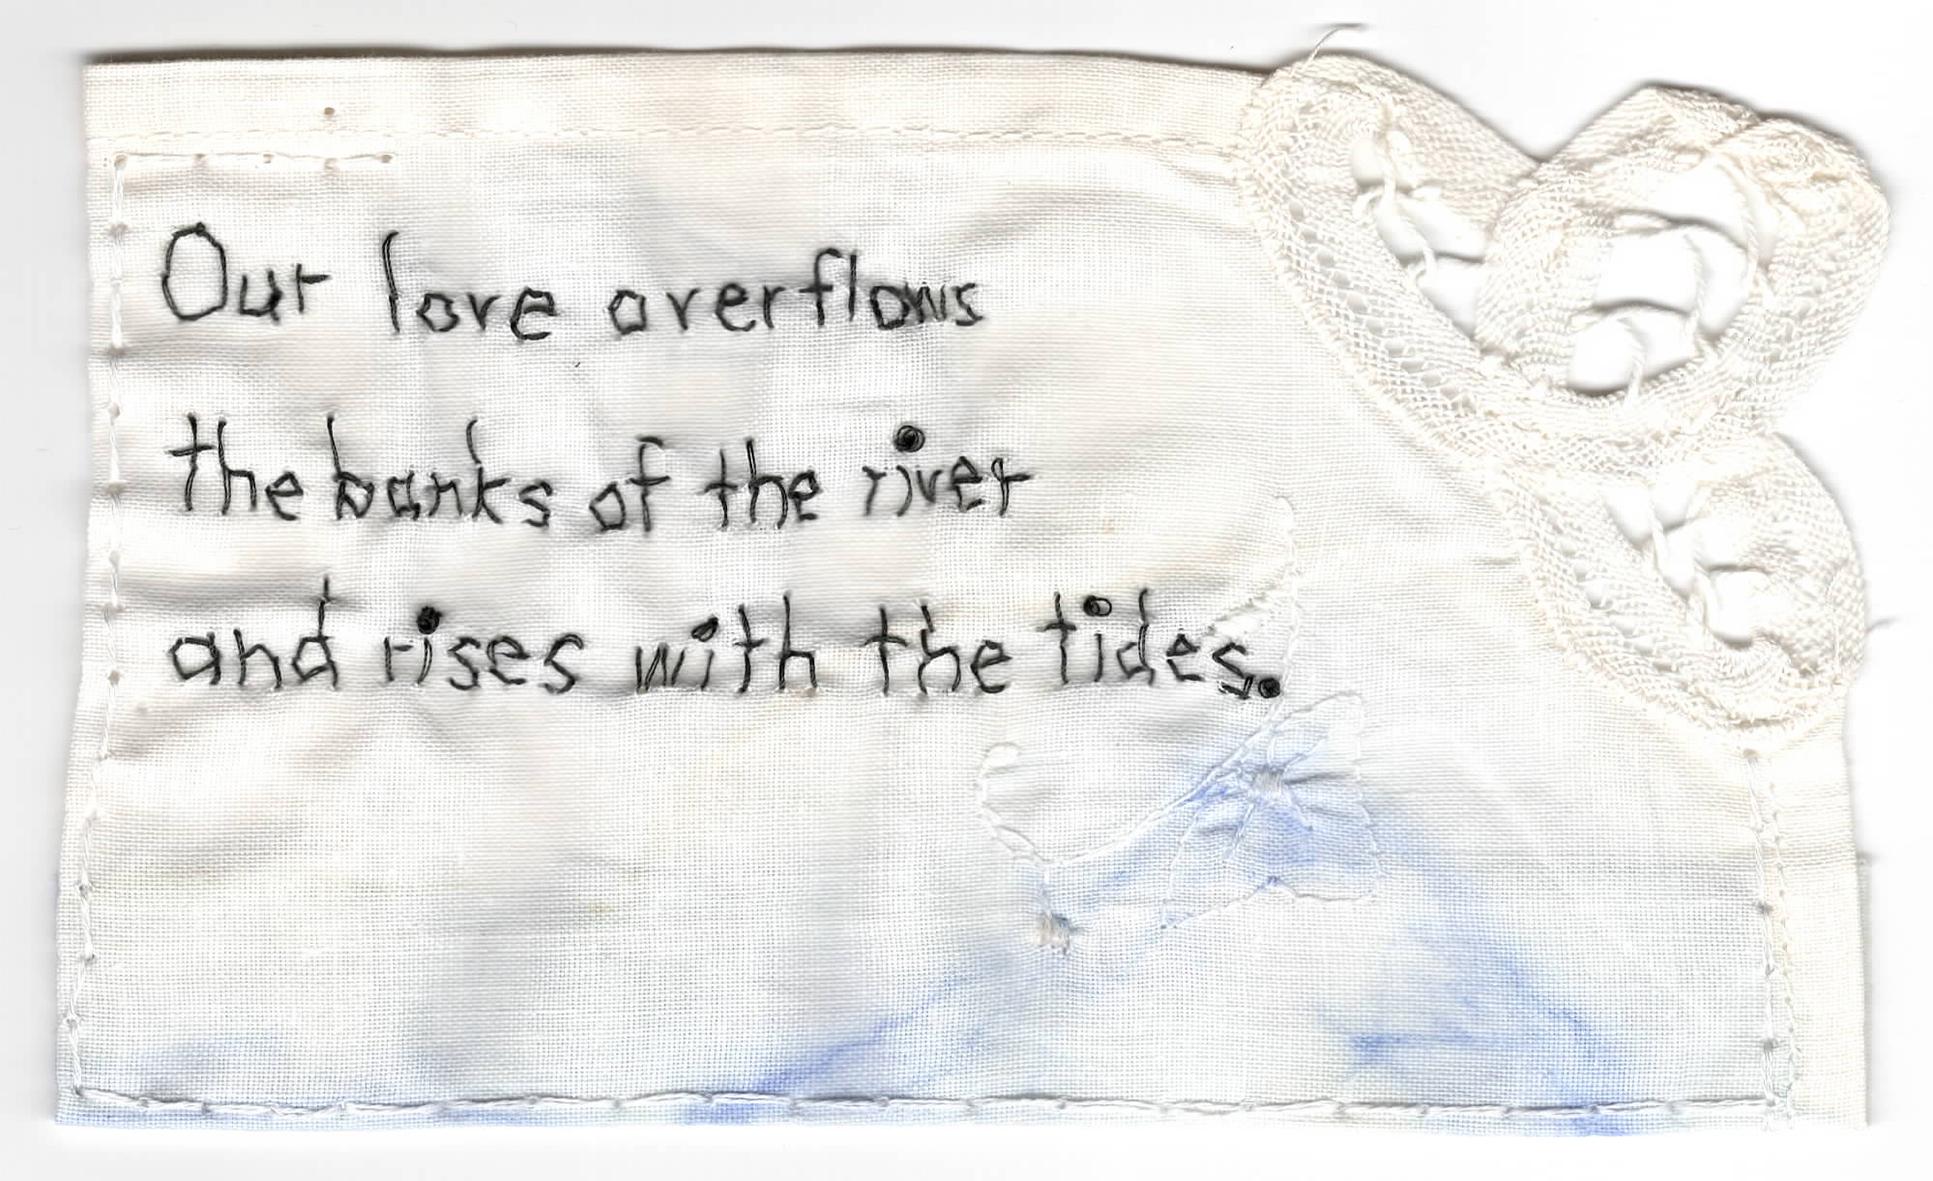 River- love narrative embroidery on fabric - Art by Iviva Olenick